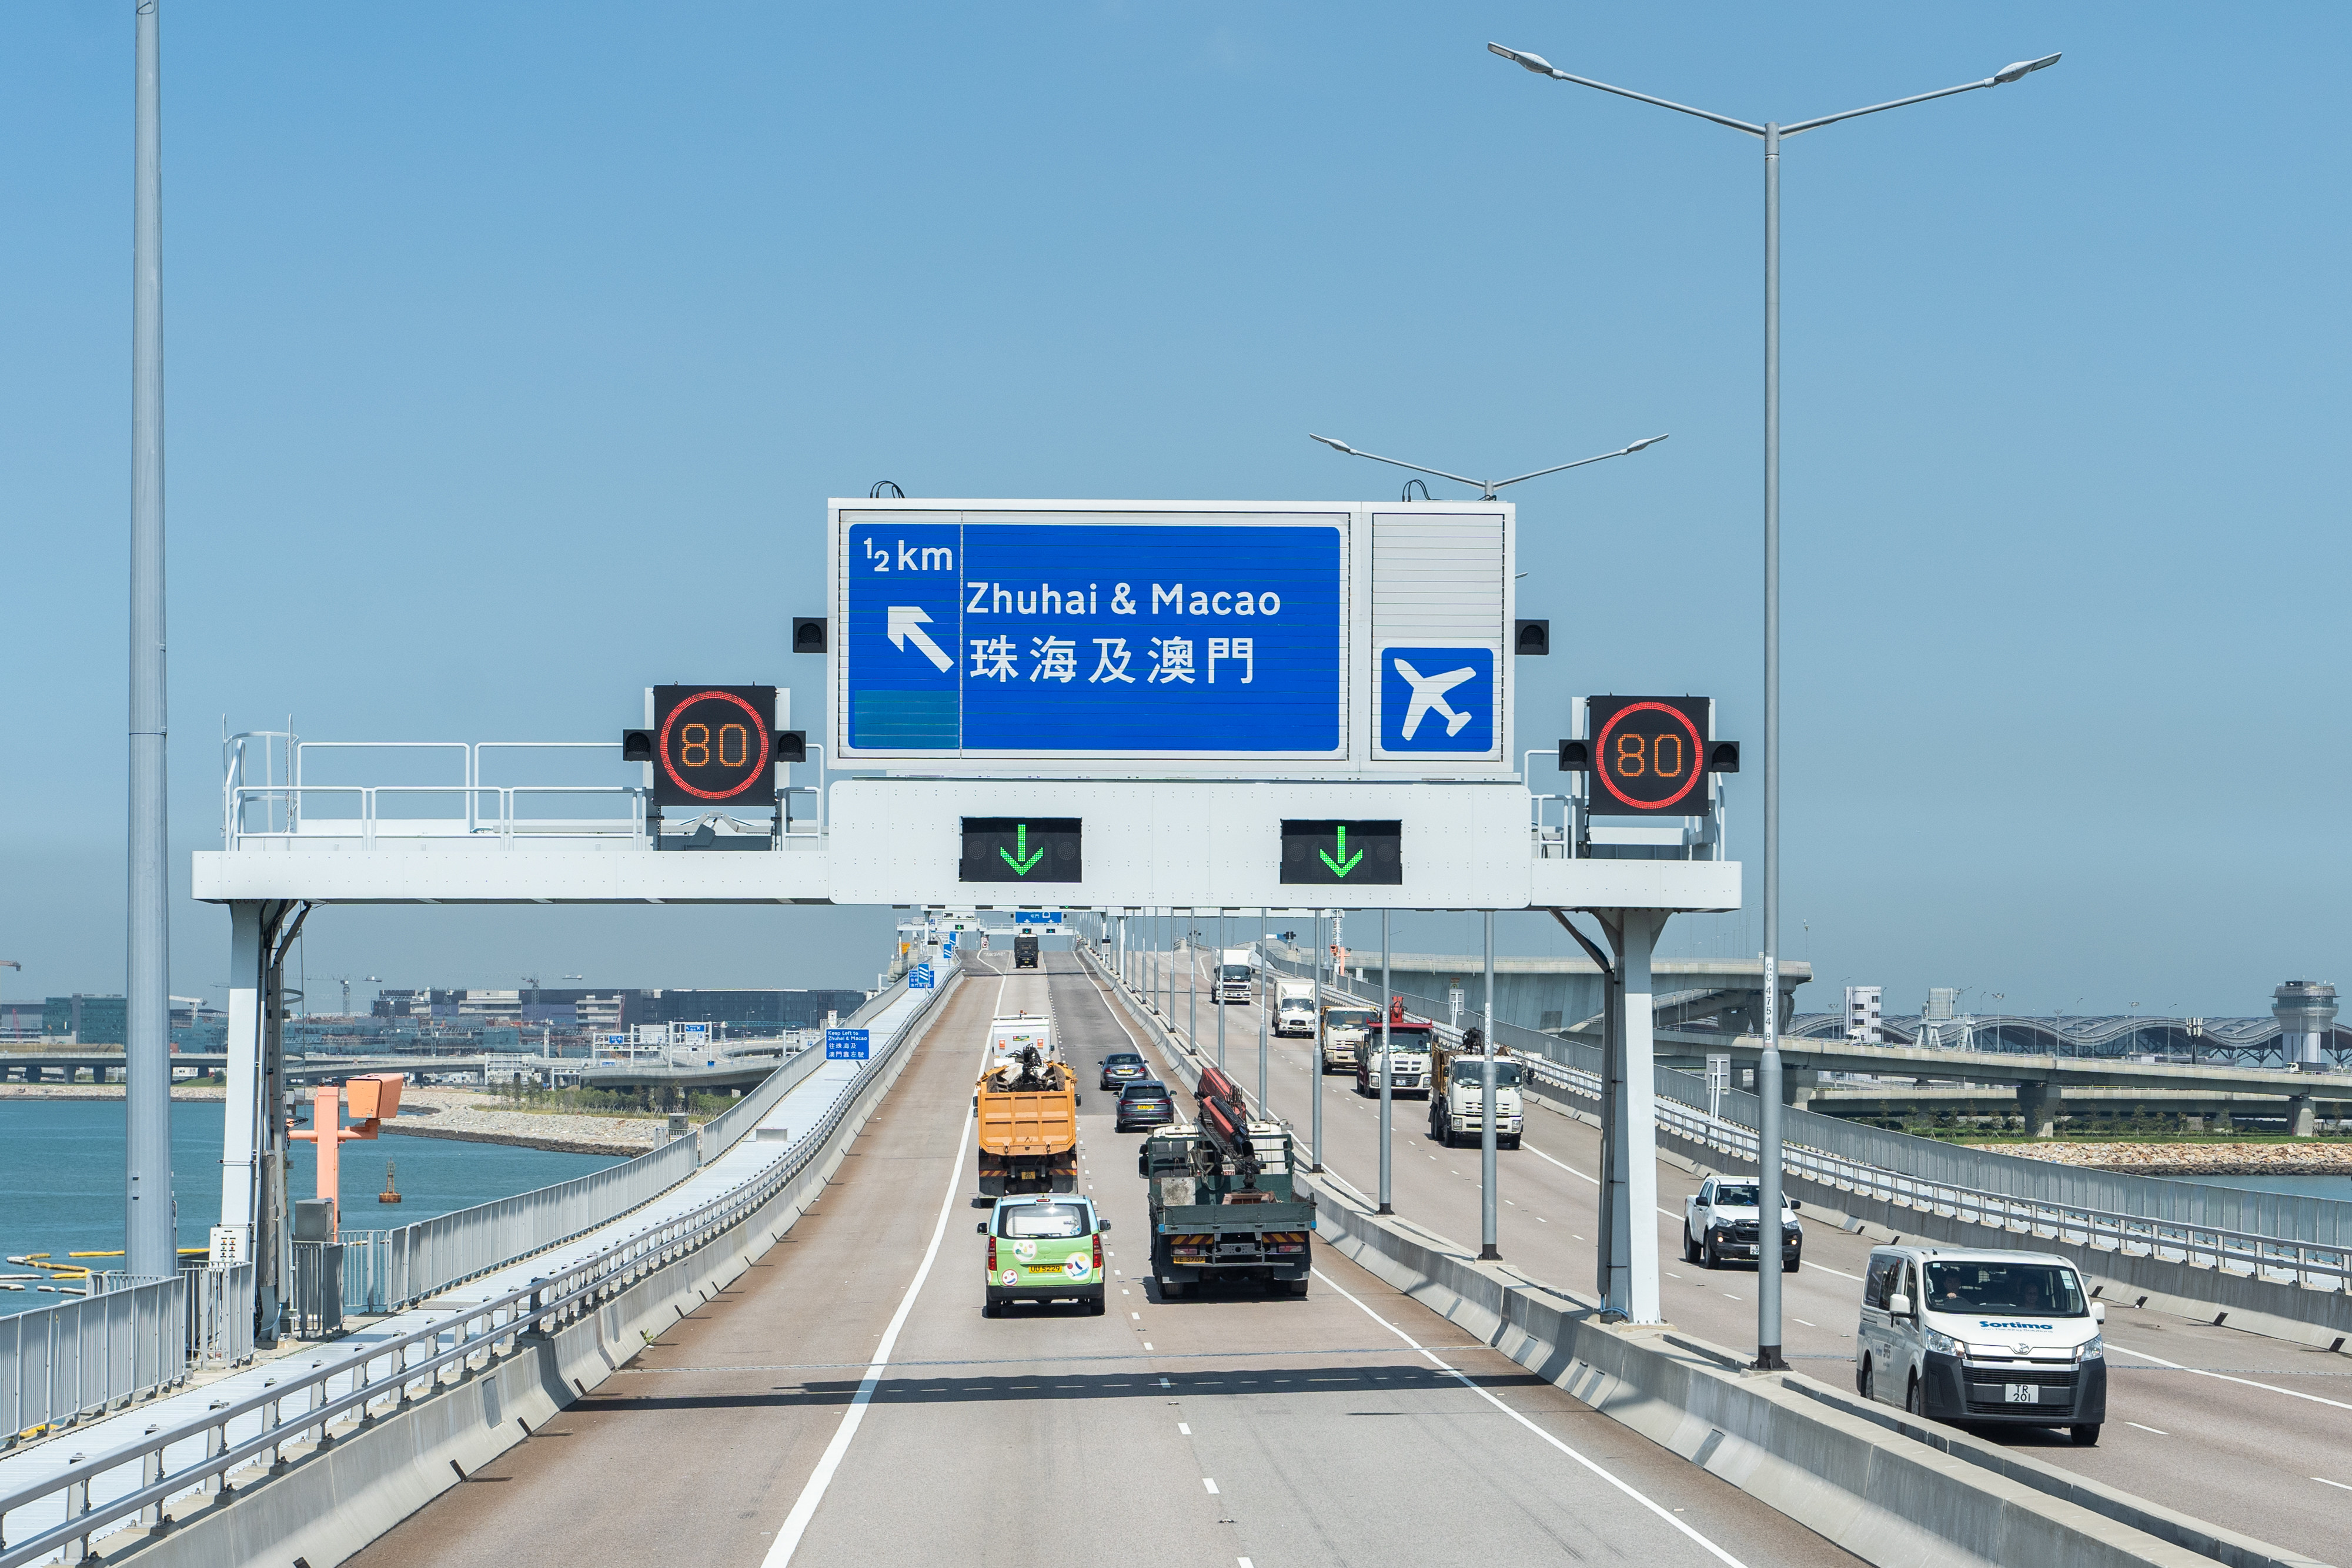 Driving to mainland China is about to become much easier under a highly anticipated scheme that will allow more private cars from the city into the rest of Guangdong province. Photo: Bloomberg